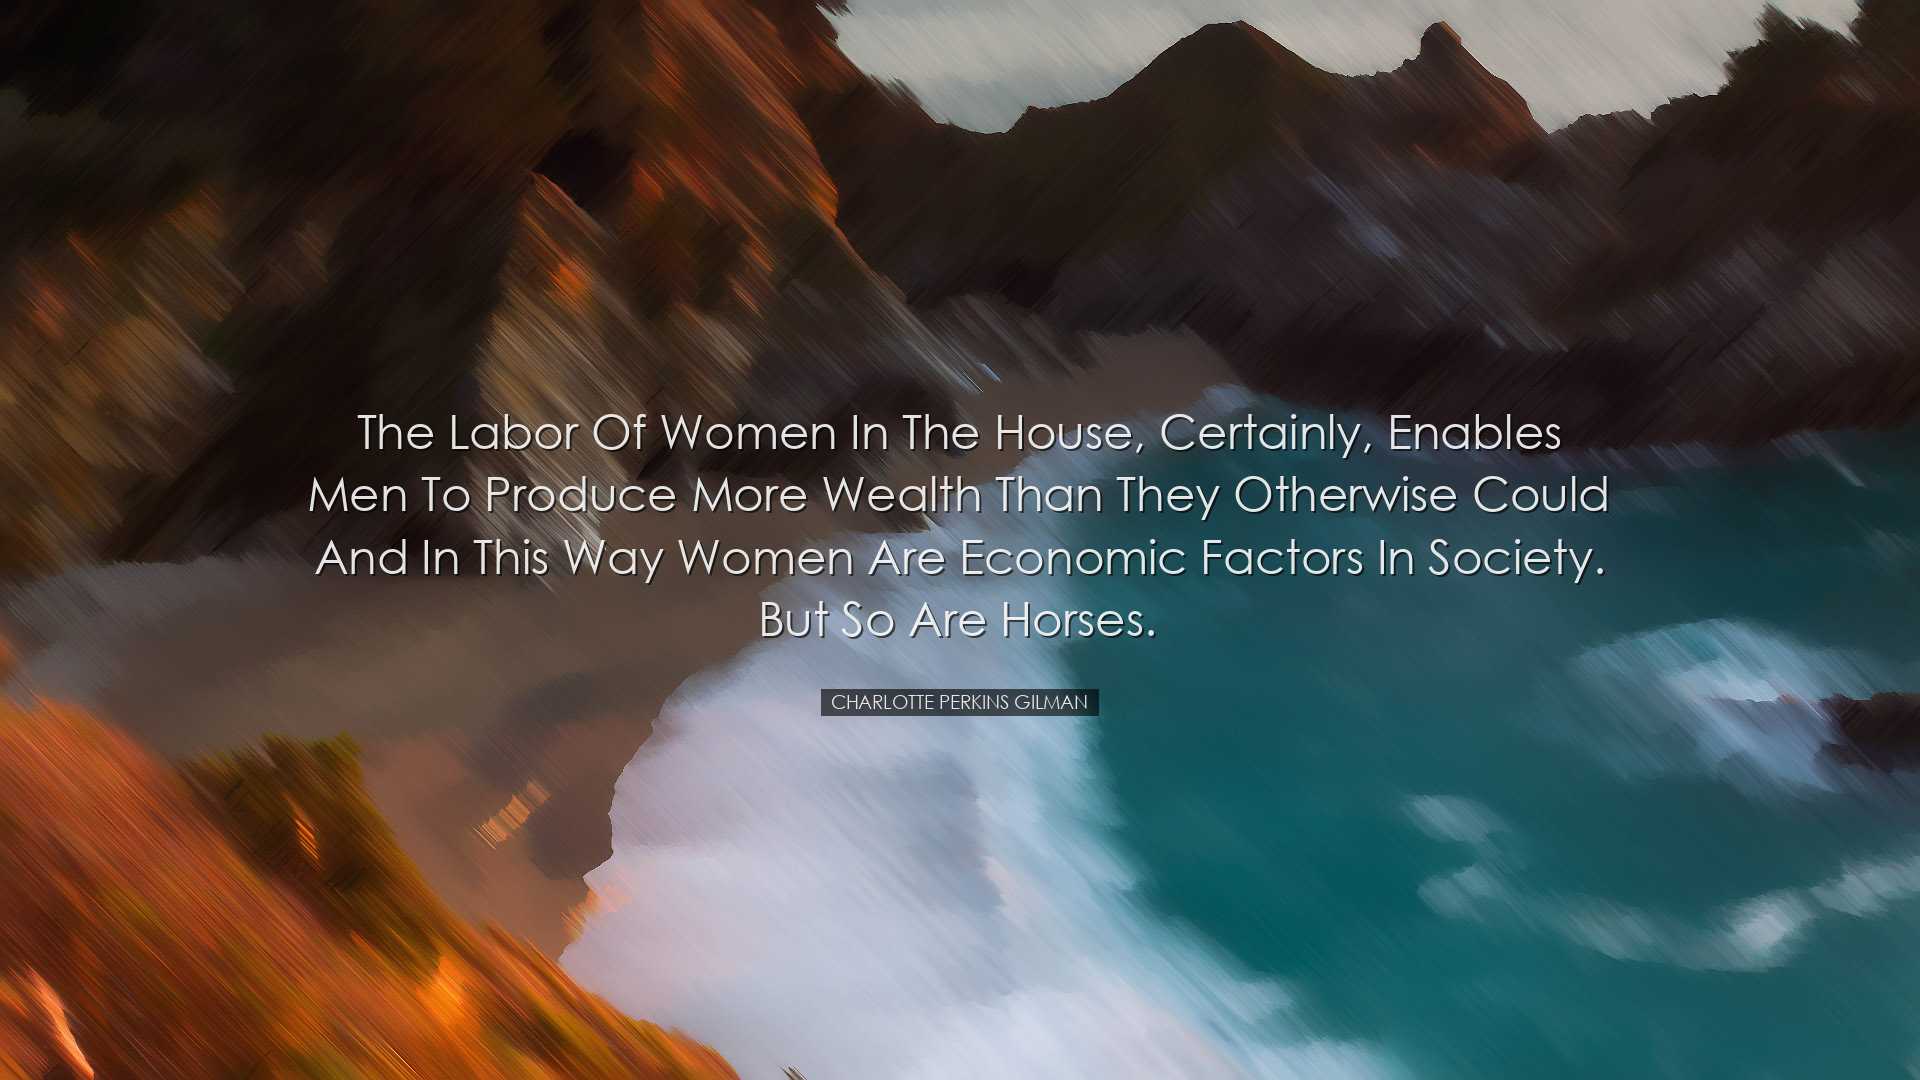 The labor of women in the house, certainly, enables men to produce